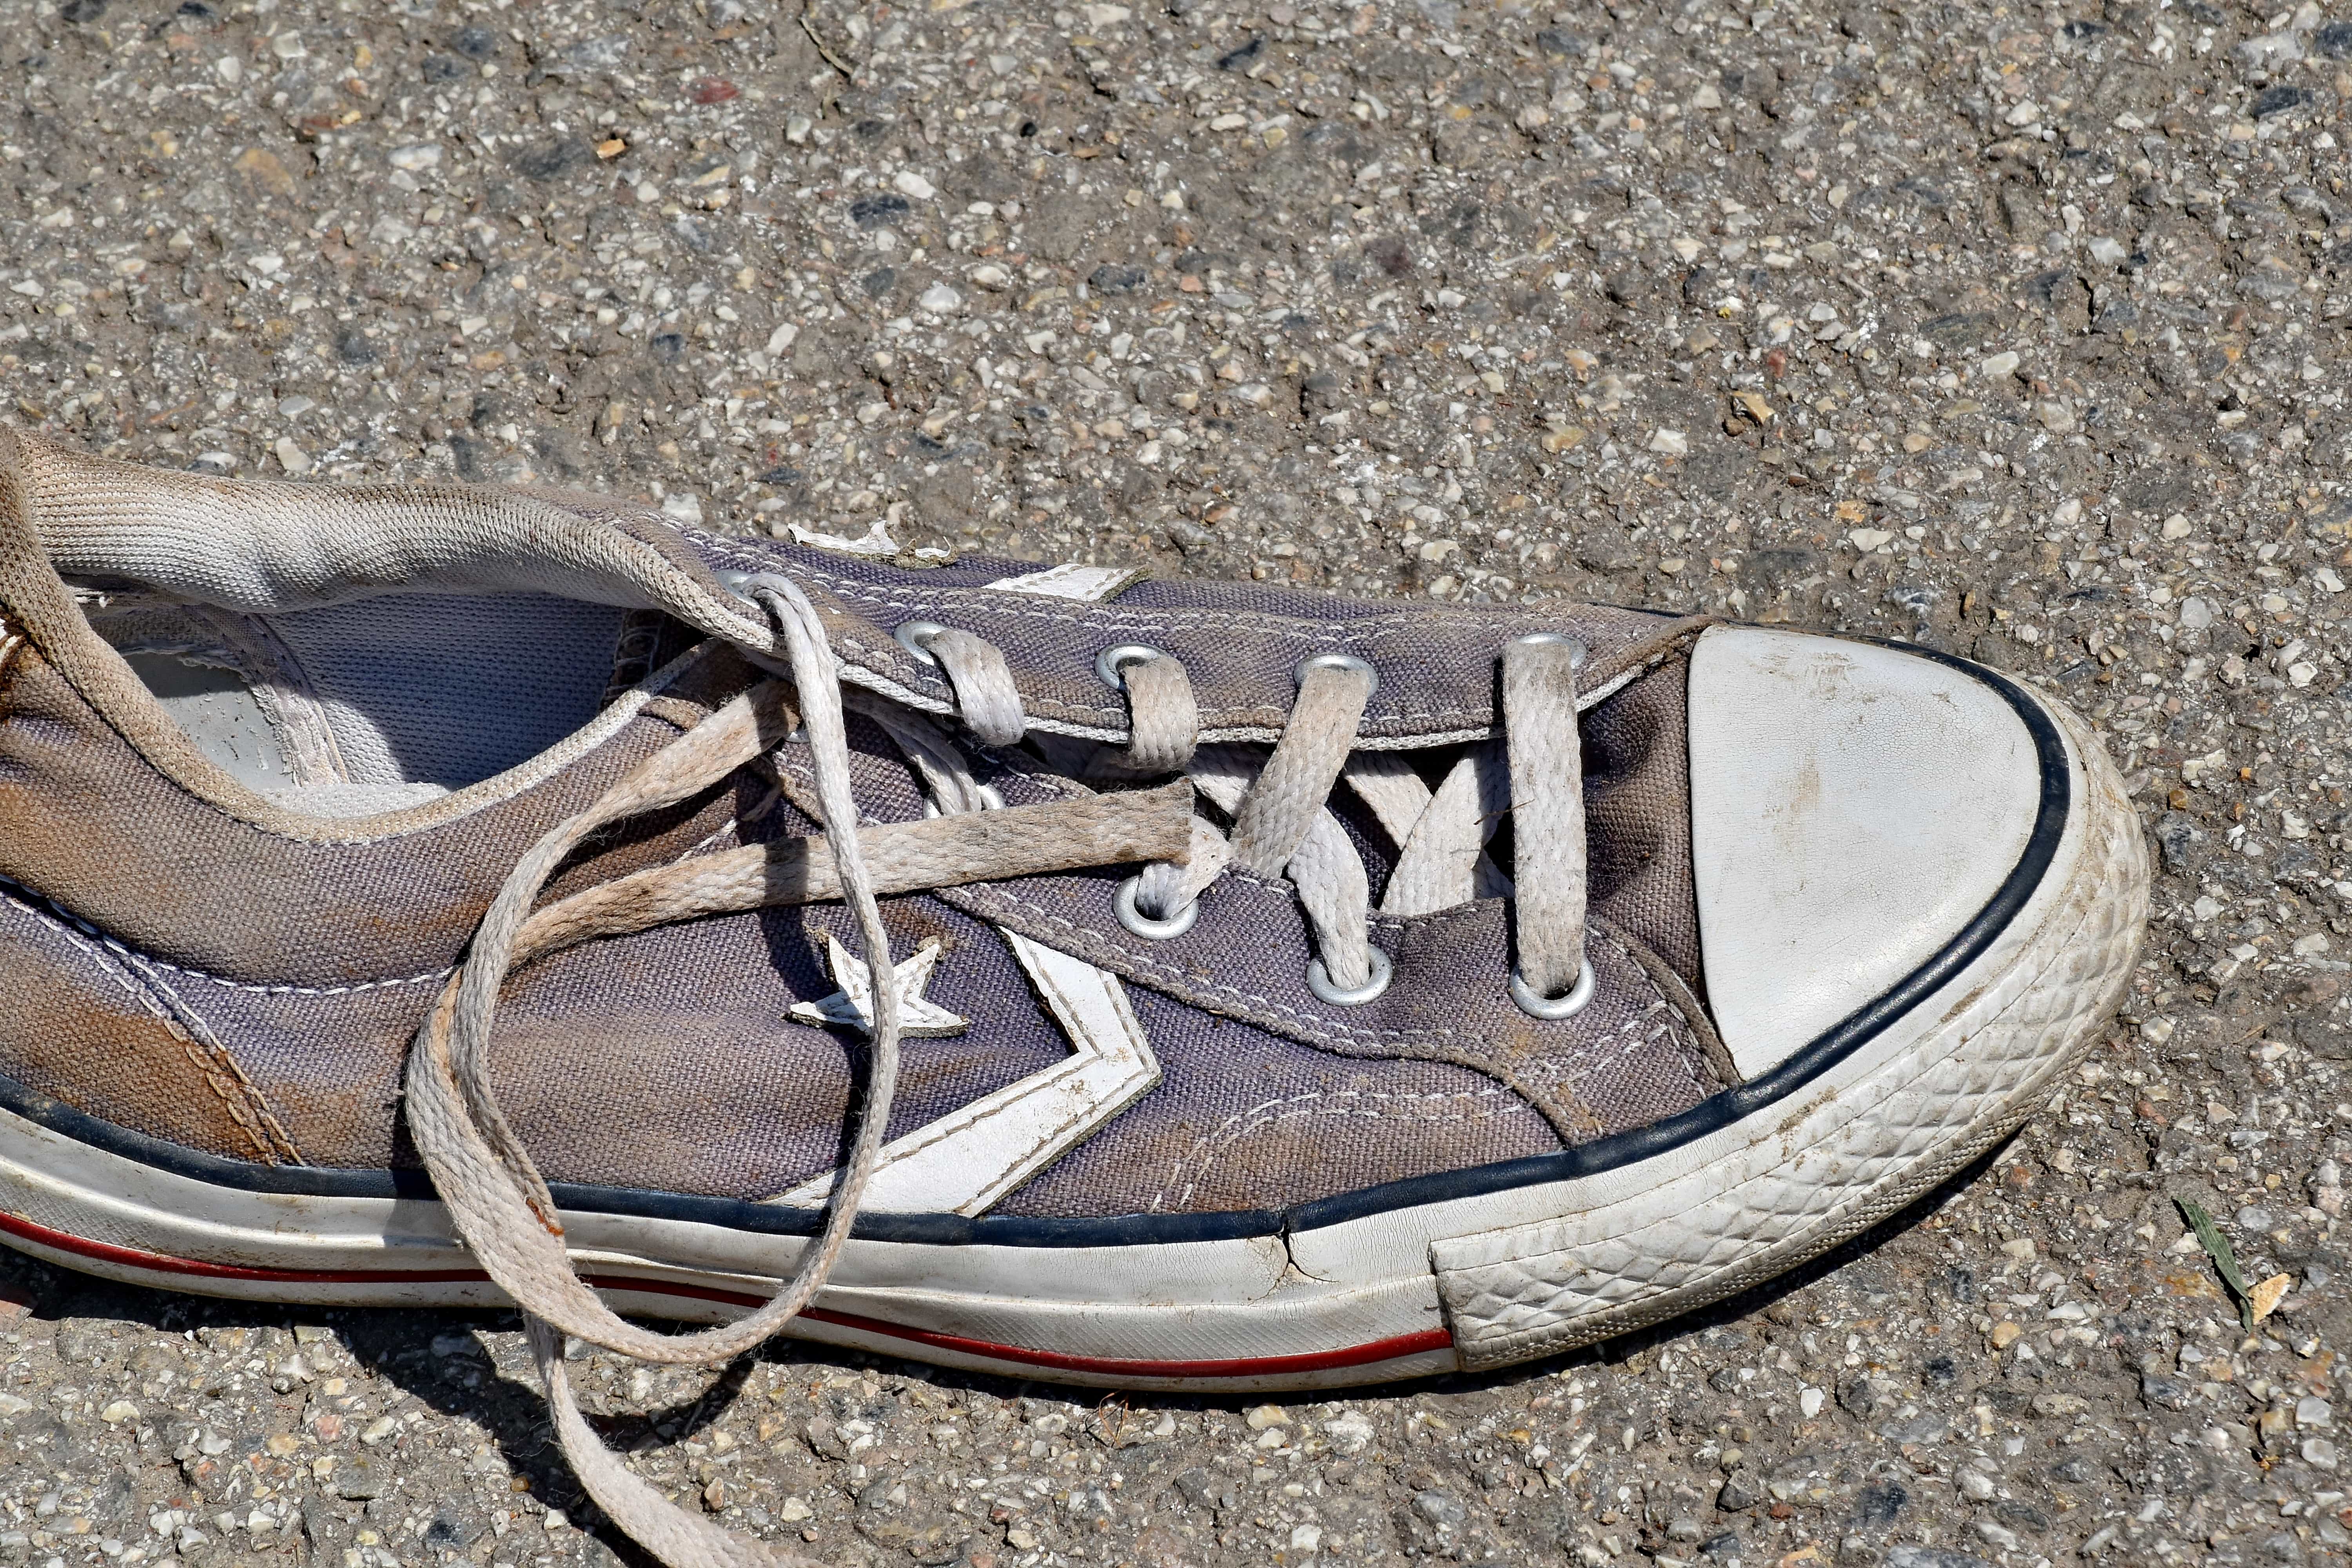 Free picture: footwear, fashion, dirty, sneakers, old, ground, street ...